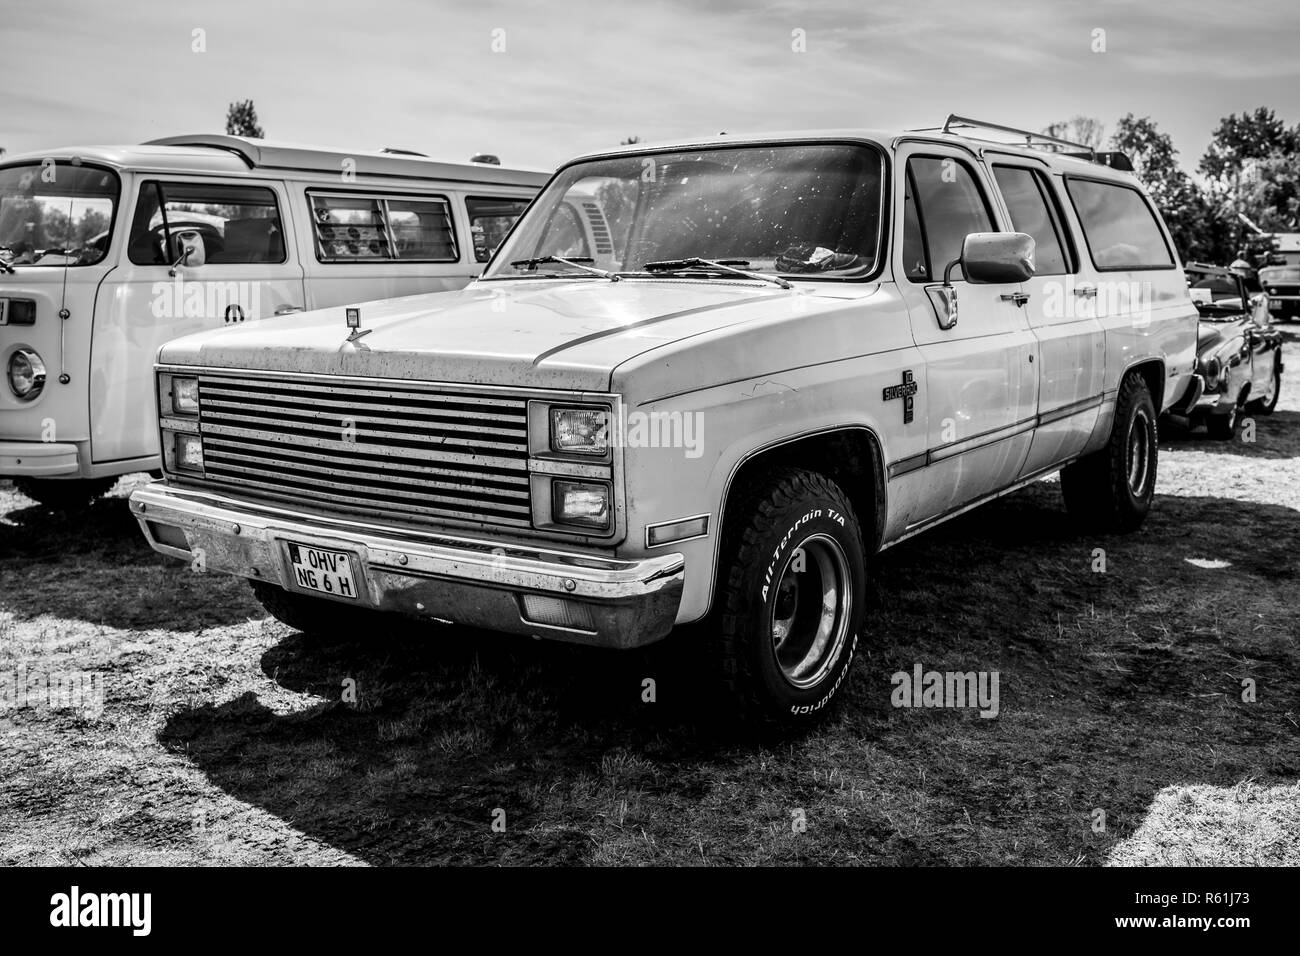 PAAREN IM GLIEN, GERMANY - MAY 19, 2018: Full-size pickup truck Chevrolet Silverado C10, 1982. Black and white. Exhibition 'Die Oldtimer Show 2018'. Stock Photo